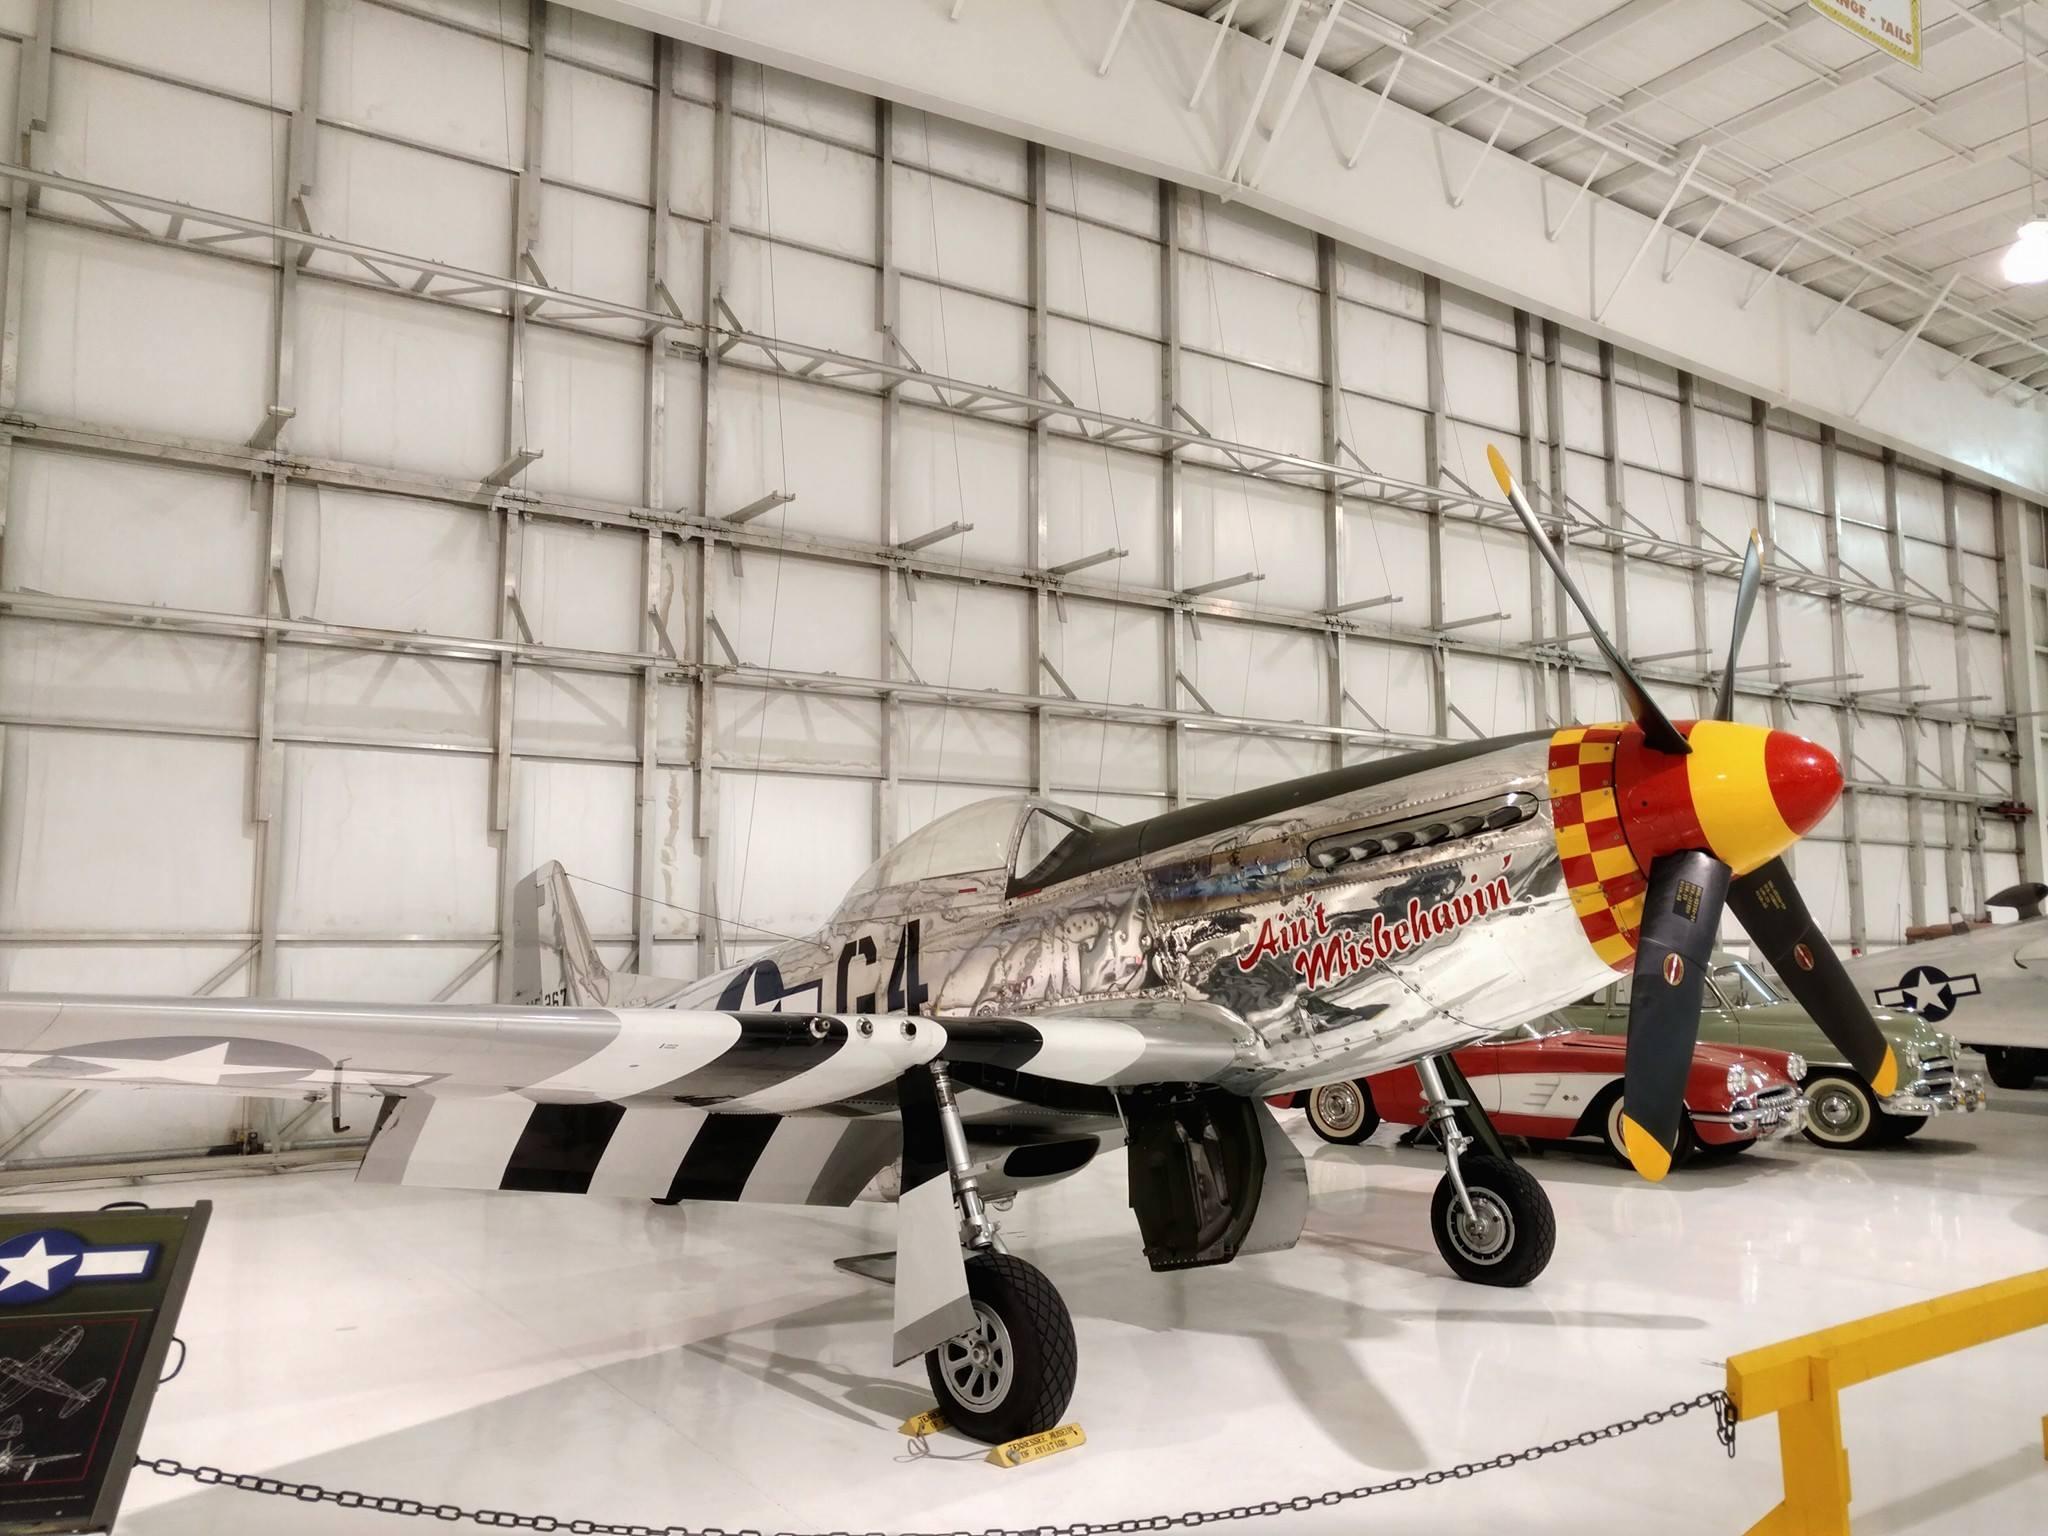 Pet Friendly Tennessee Museum of Aviation